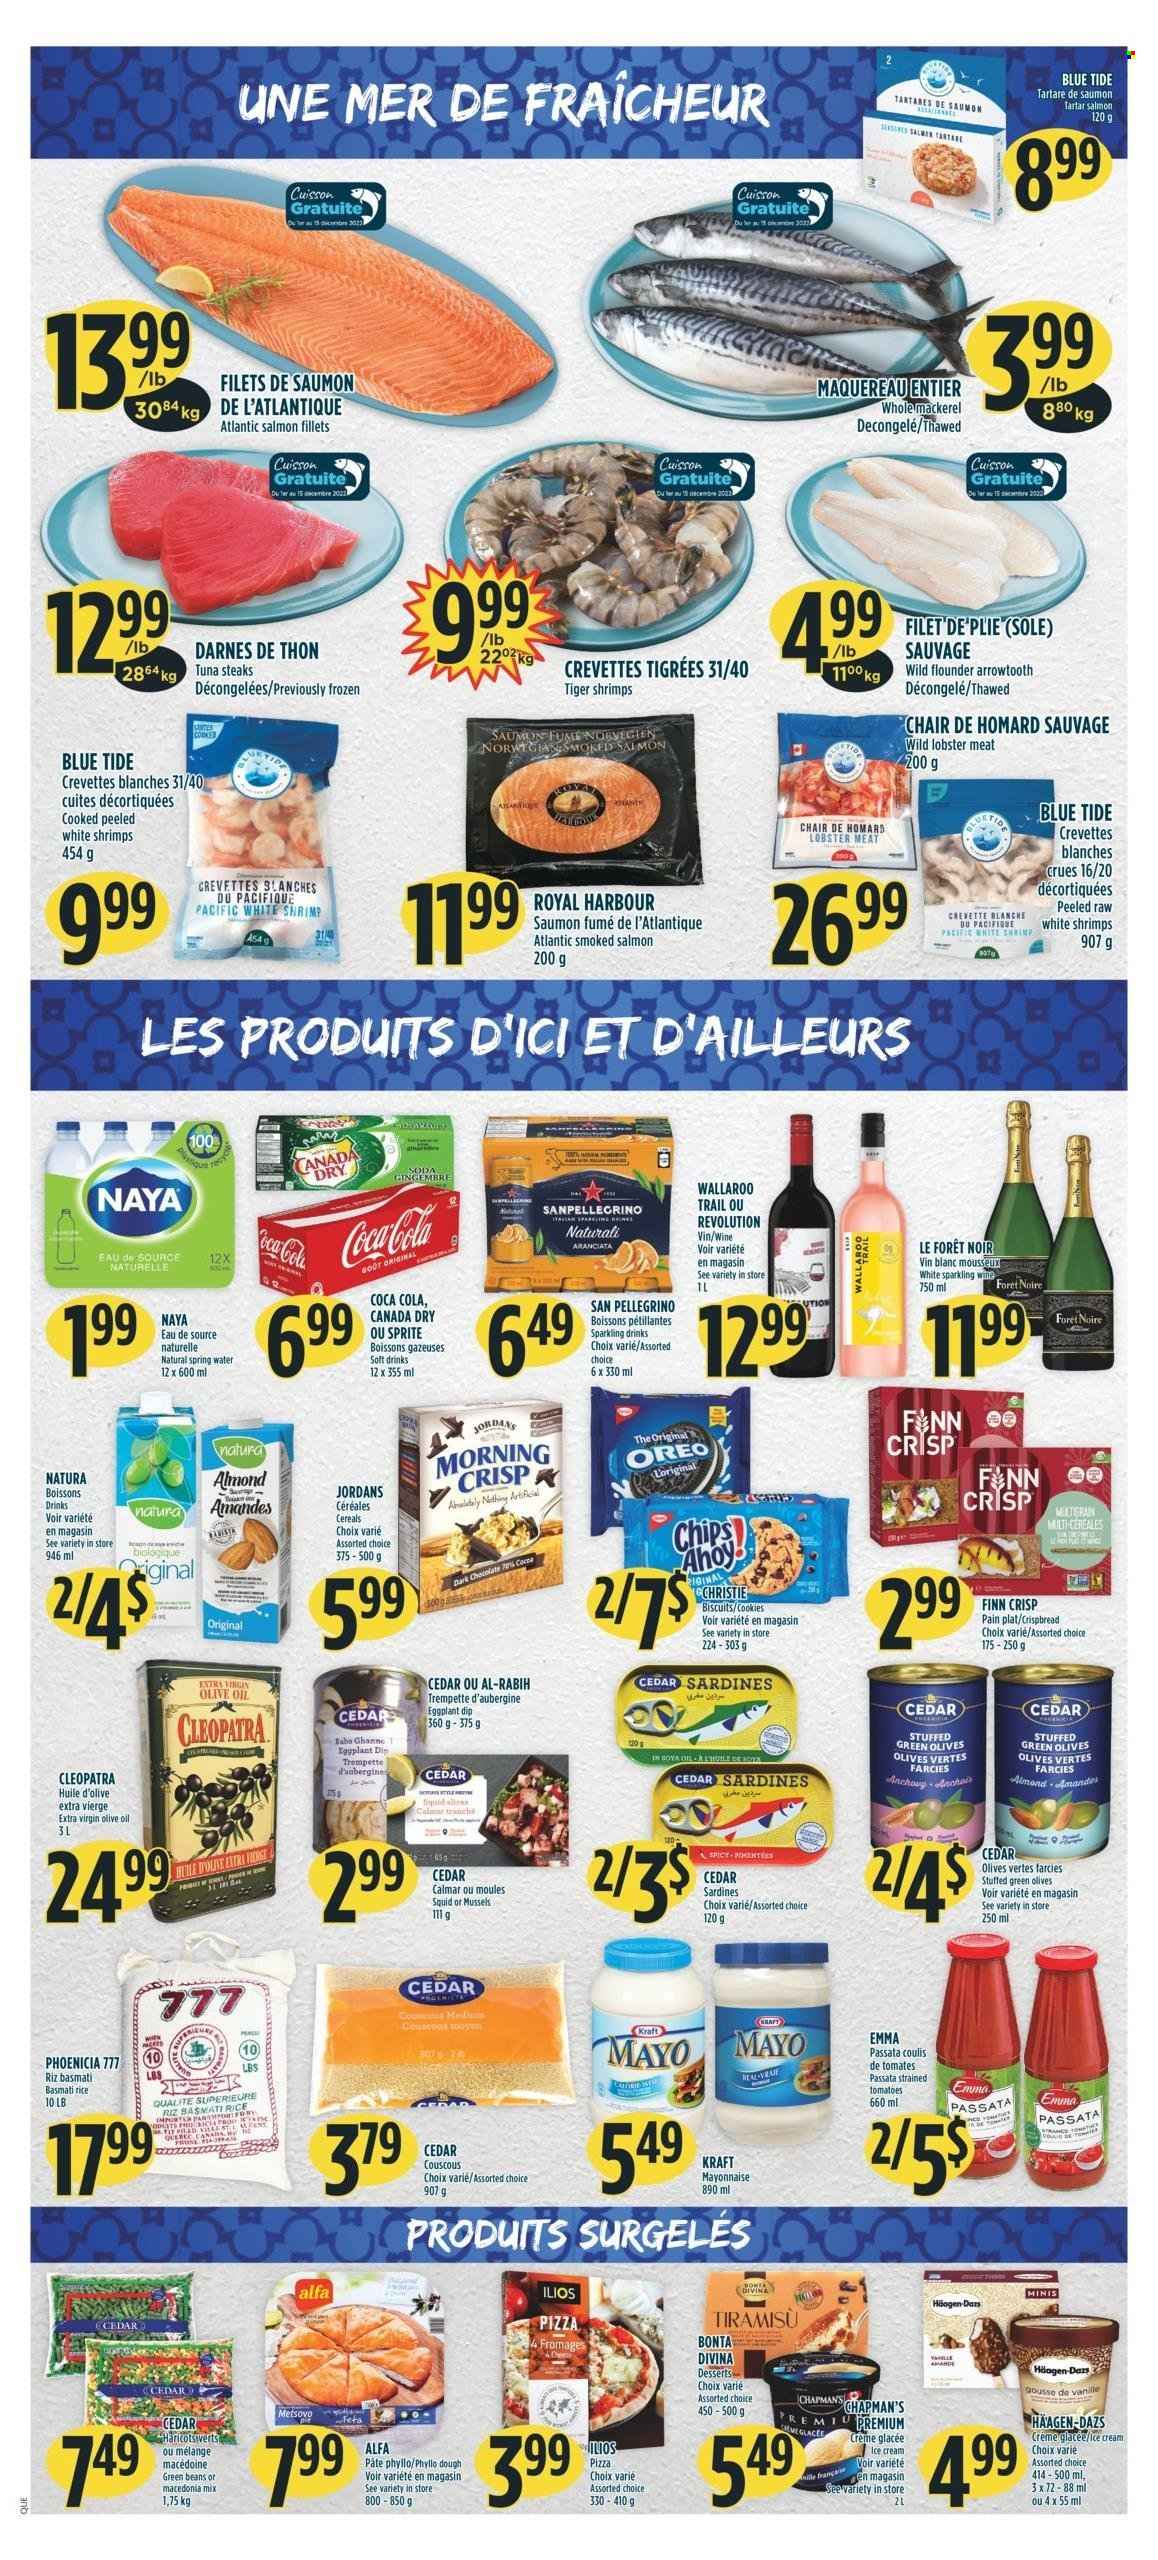 thumbnail - Adonis Flyer - February 09, 2023 - February 15, 2023 - Sales products - tiramisu, crispbread, beans, green beans, eggplant, flounder, lobster, mackerel, mussels, salmon, salmon fillet, sardines, smoked salmon, squid, tuna, shrimps, pizza, Kraft®, feta, mayonnaise, dip, ice cream, Häagen-Dazs, cookies, biscuit, dark chocolate, cereals, basmati rice, rice, spice, extra virgin olive oil, olive oil, oil, Canada Dry, Coca-Cola, Sprite, soft drink, spring water, San Pellegrino, sparkling wine, wine, Tide, couscous, olives, Oreo, steak. Page 4.